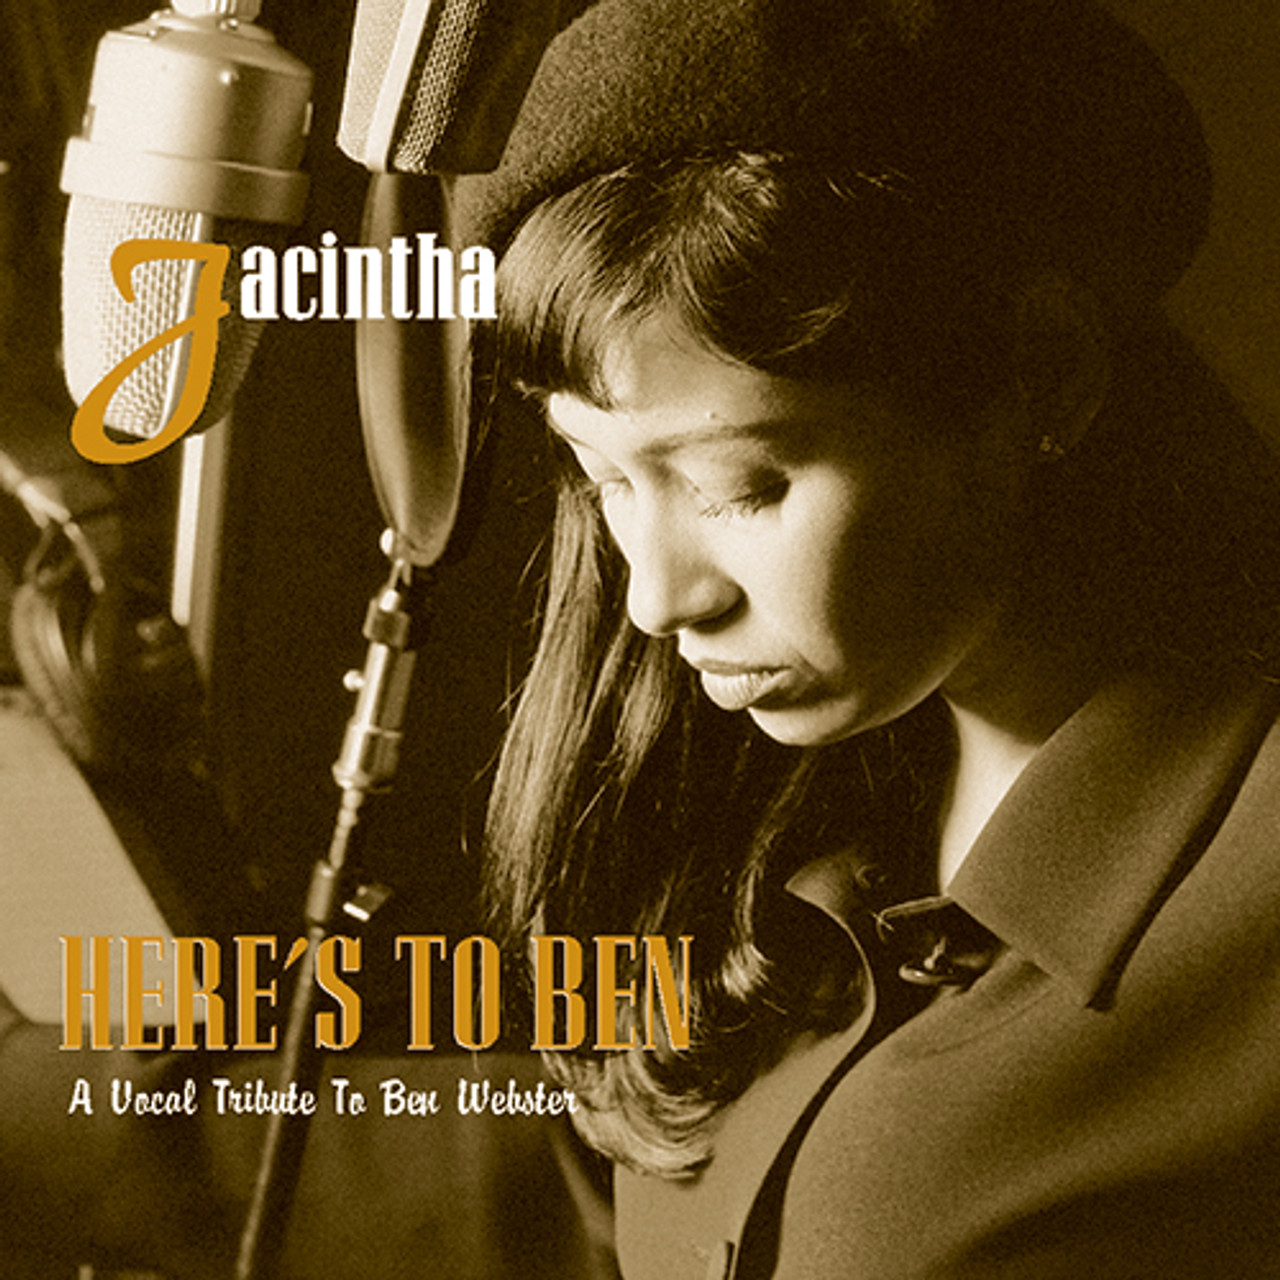 Jacintha - Here's To Ben A Vocal Tribute To Ben Webster 180g 45rpm 2LP